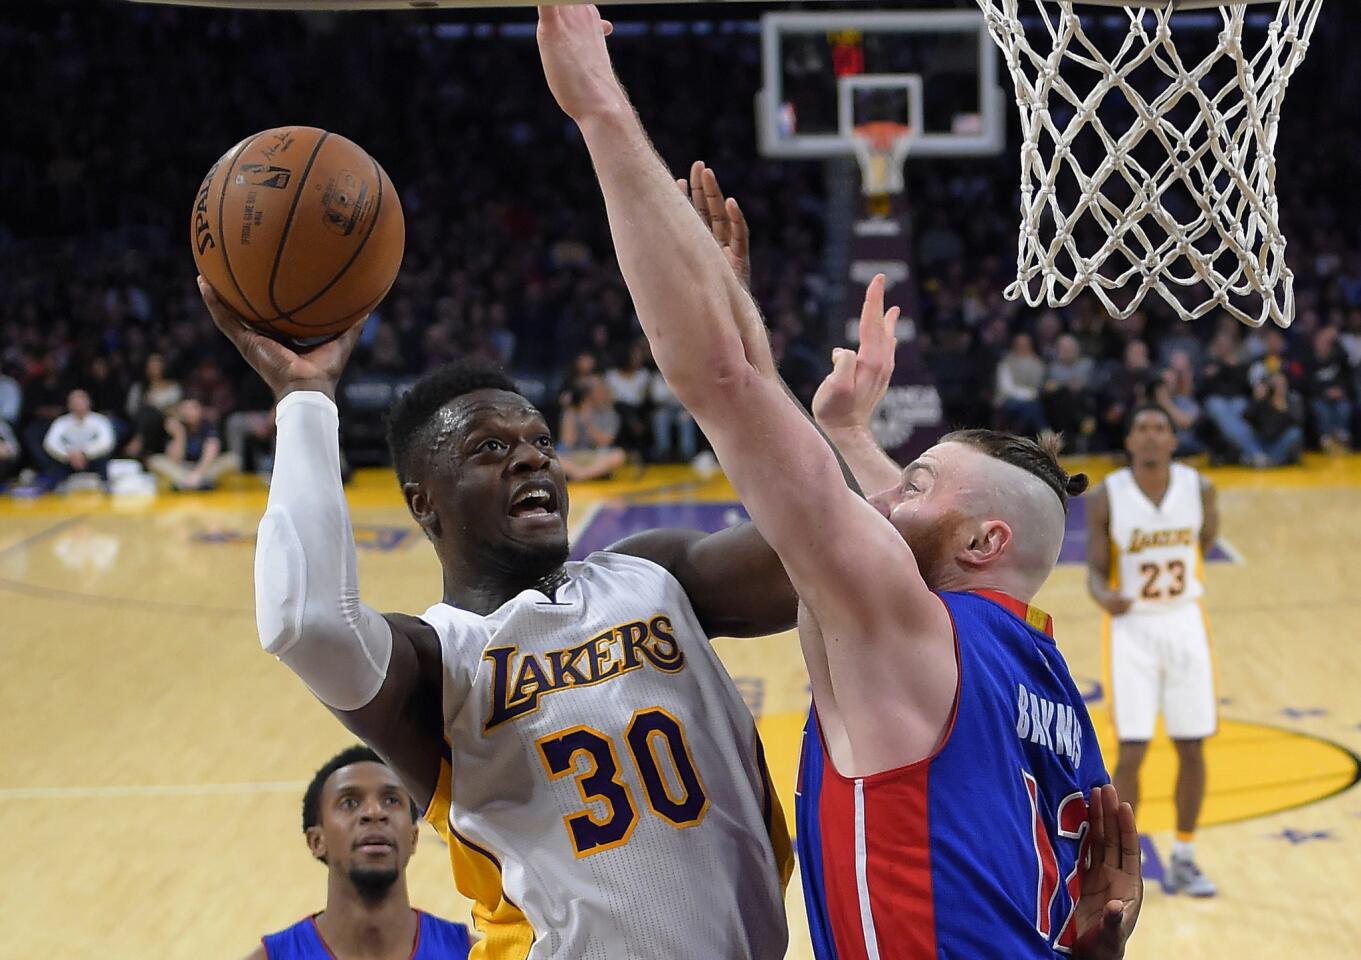 Lakers forward Julius Randle (30) has his shot challenged by Pistons center Aron Baynes during the first half.